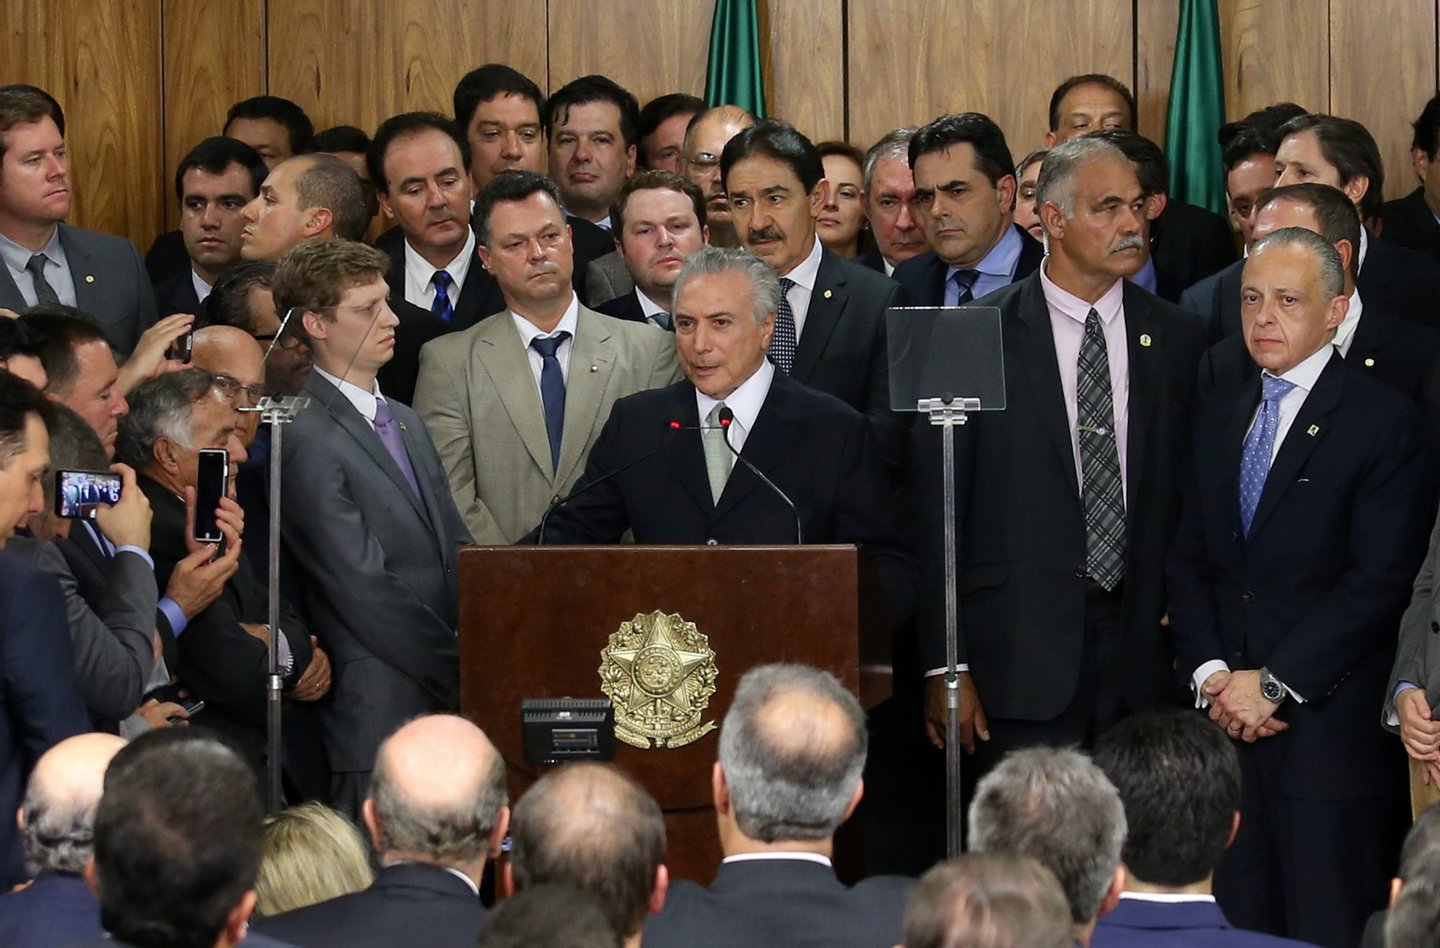 Michel Temer, Brazil's acting president, center, speaks during an event in Brasilia, Brazil, on Thursday, May 12, 2016. Temer has been the number two to President Dilma Rousseff of Brazil and now, with her temporary ouster, takes charge, buoyed by an almost evangelical market faith in him, as seen by the real's spike -- the world's best-performing currency this year -- and bond yield's plunge. It is widely expected that Rousseff will not return to power. Photographer: Lula Marques/Bloomberg via Getty Images